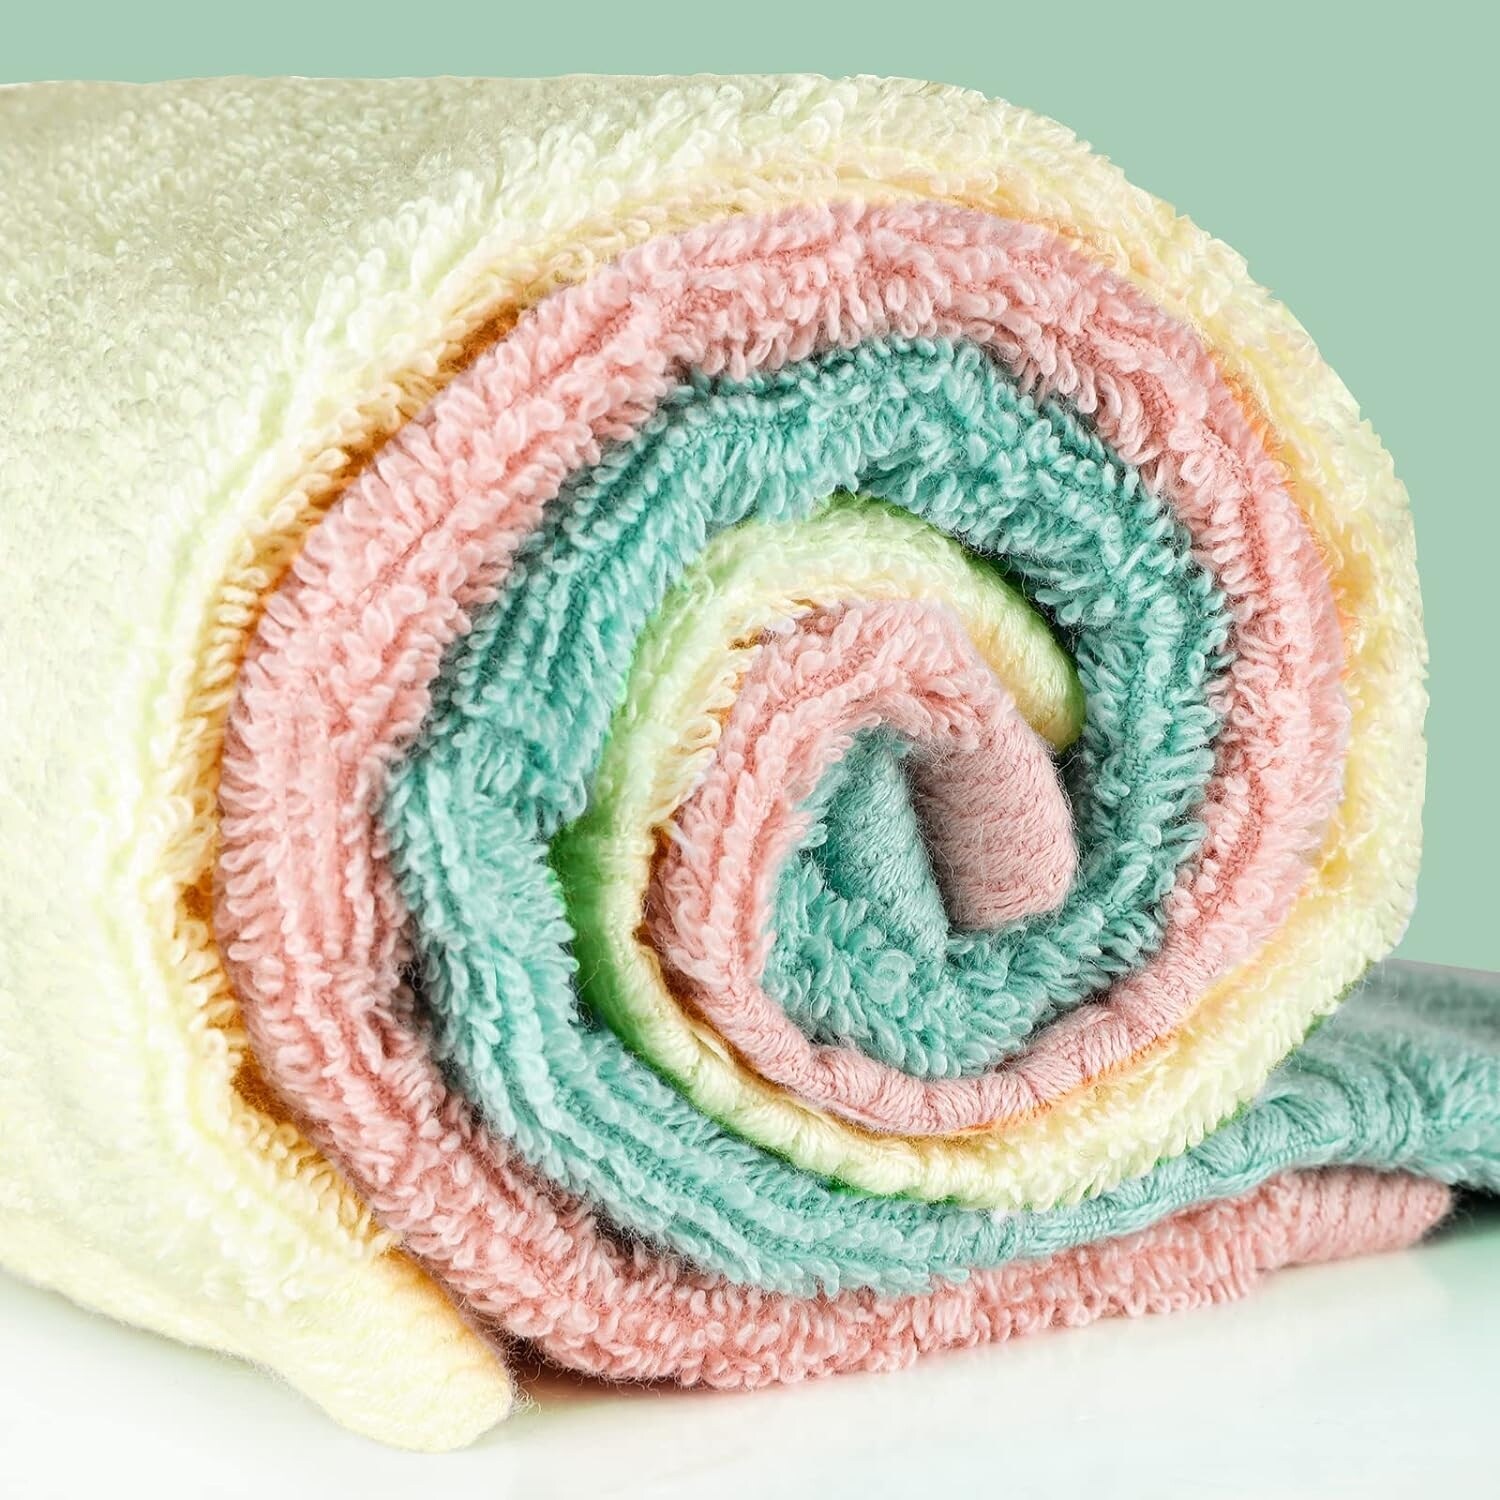 https://ak1.ostkcdn.com/images/products/is/images/direct/d735f347093b0316b132dfbb7d14a44fdc470669/Cotton-Washcloths-Absorbent-Body-and-Face-Towels.jpg